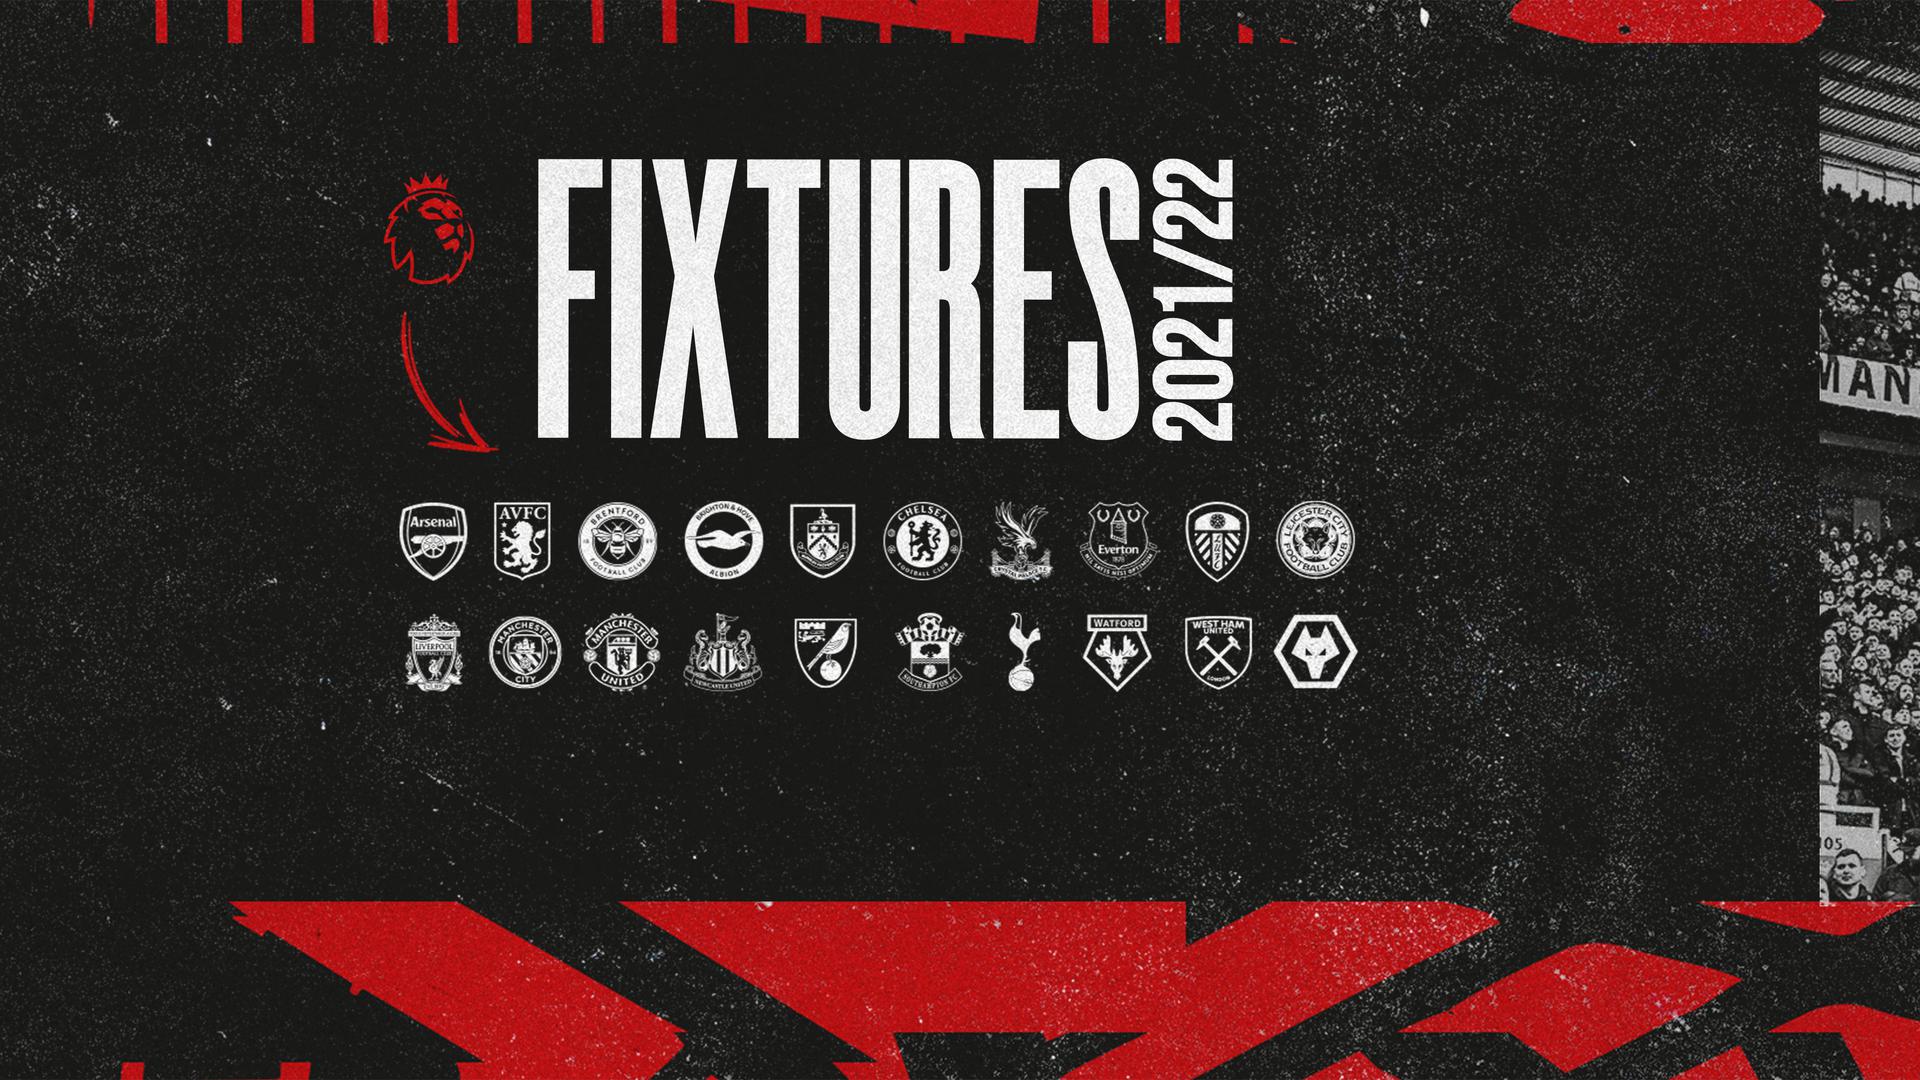 Manchester United Schedule 2022 Man Utd 2021/22 Premier League Fixtures In Full | Manchester United